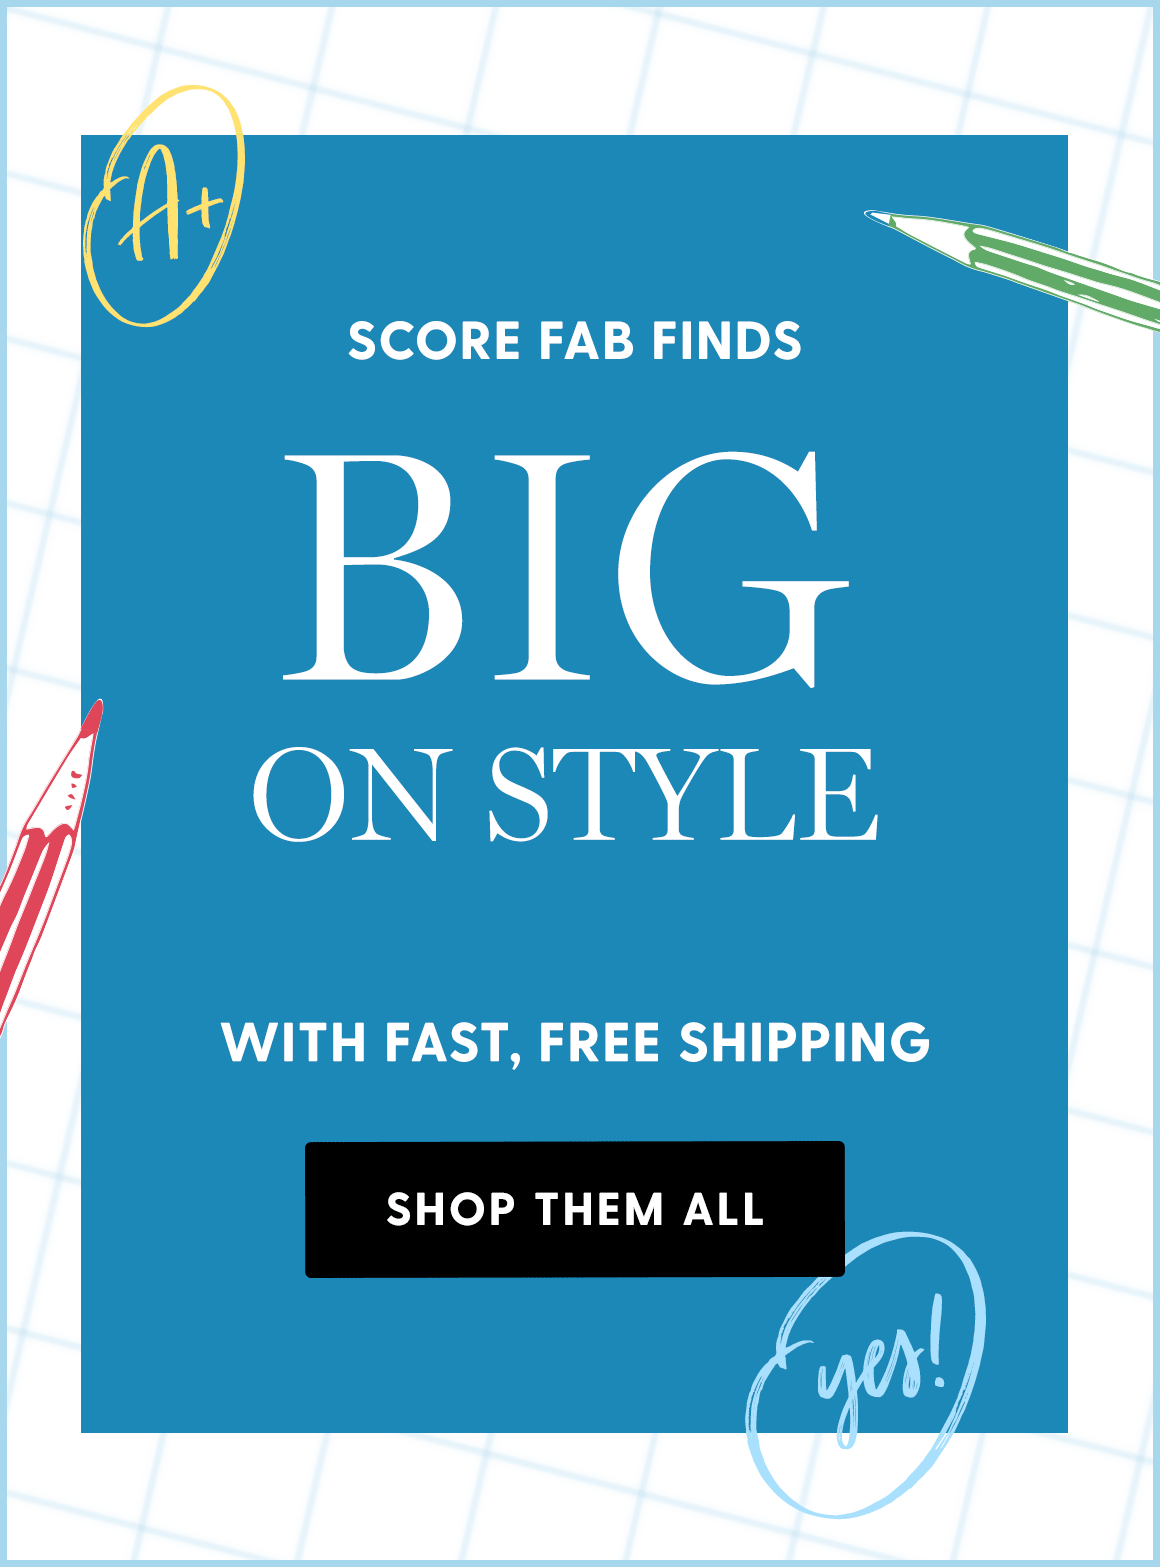 Score Fab Finds. Big On Style.With Fast, Free Shipping. Shop Them All